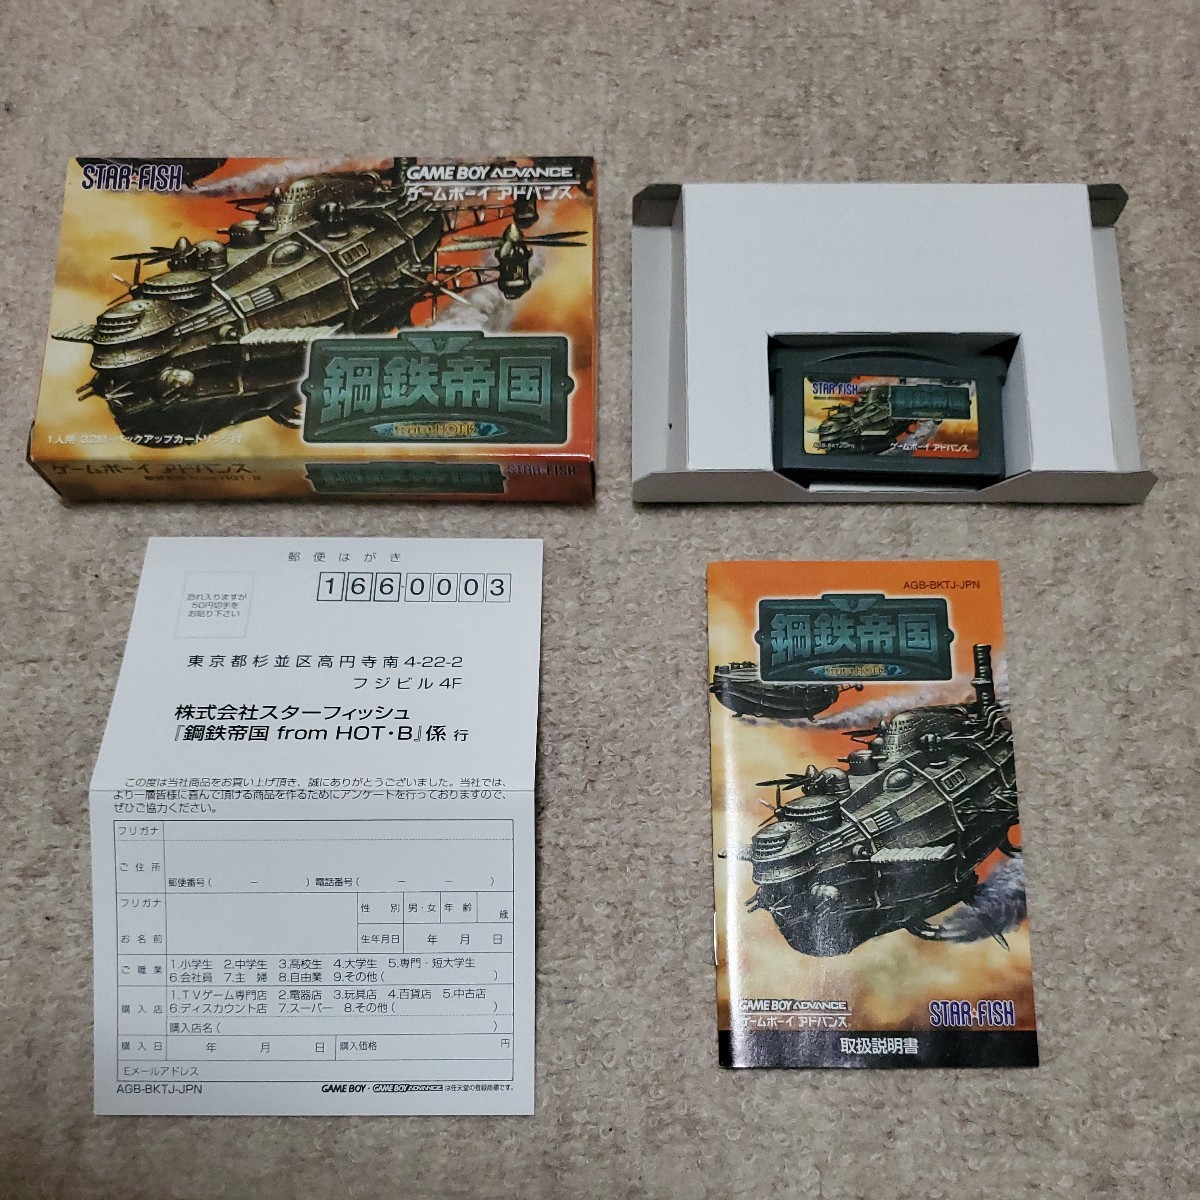 Nintendo GBA GAMEBOYADVANCE shooting game steel iron . country from HOT*B box, instructions, post card attaching 